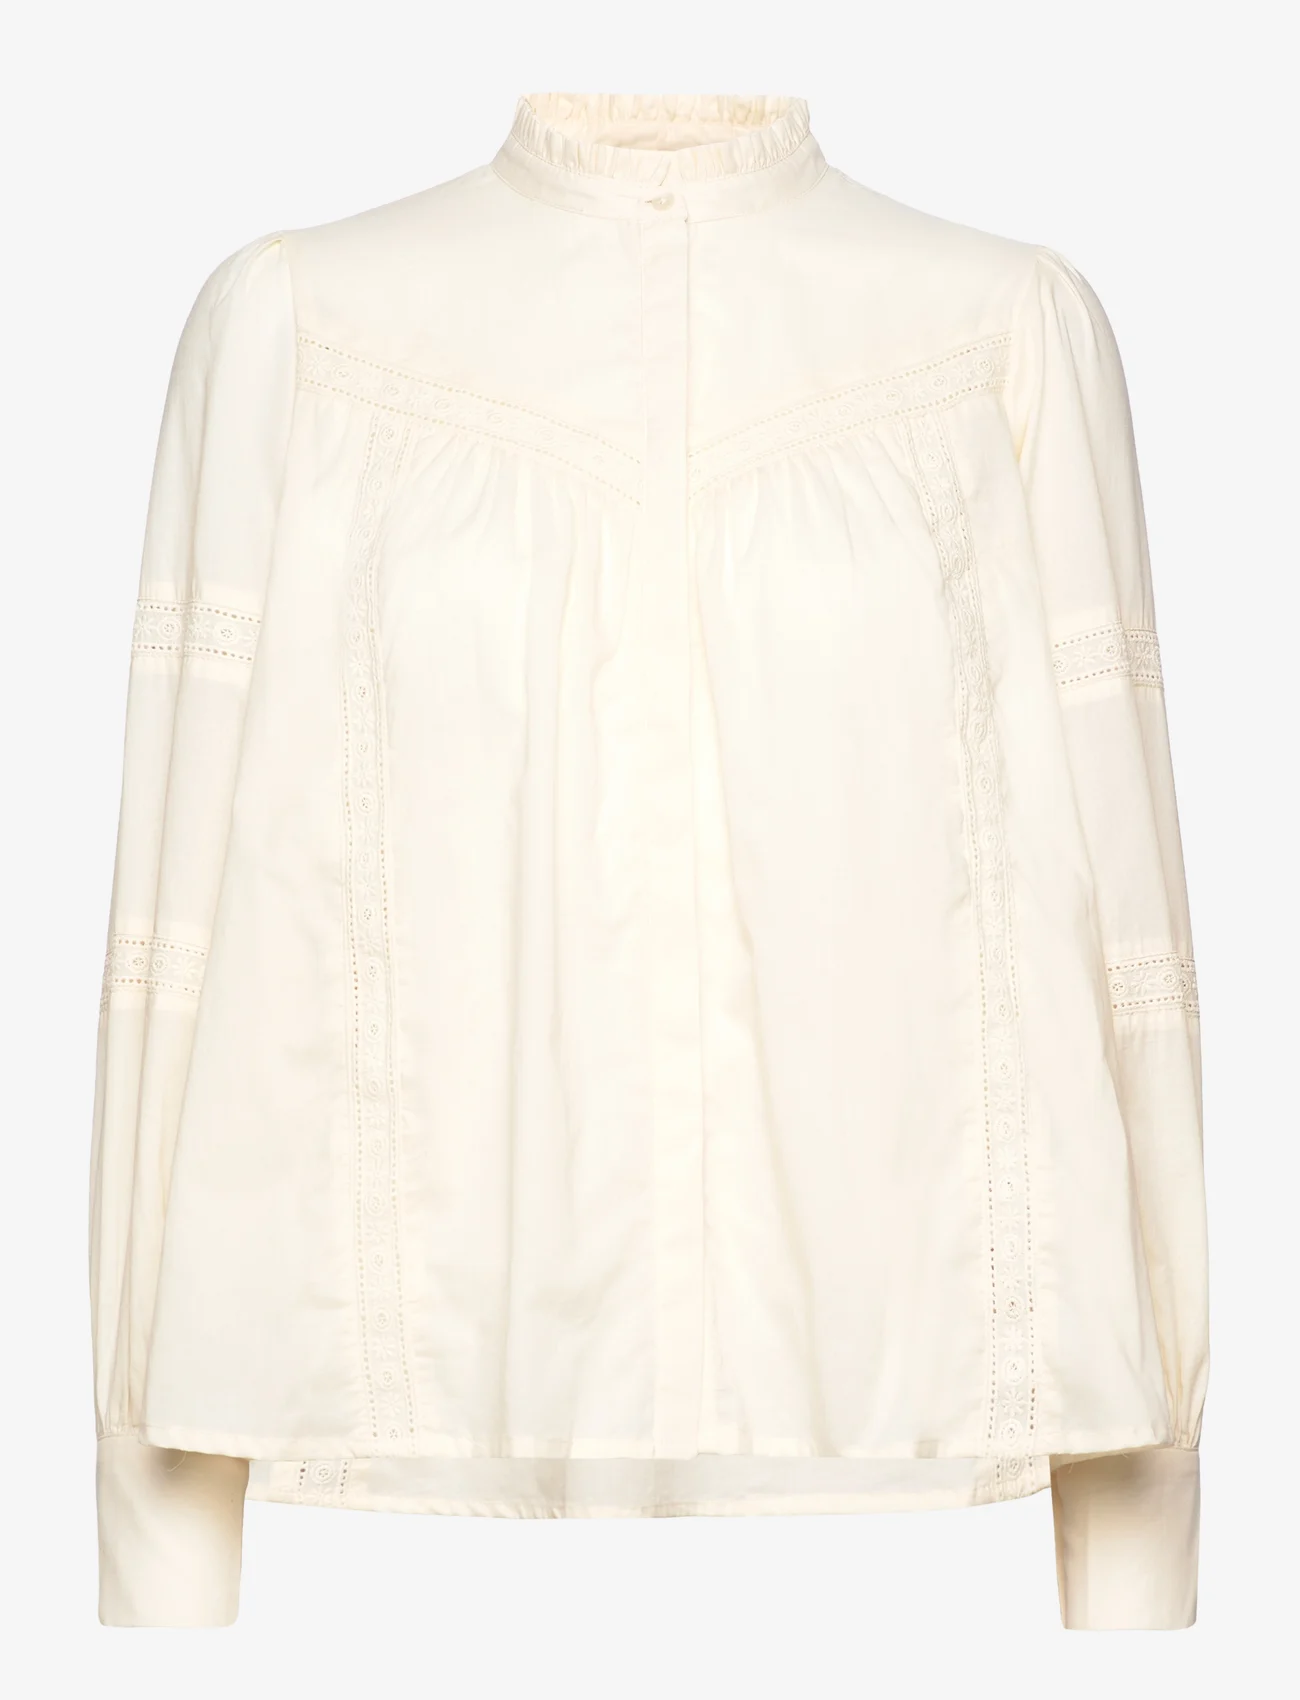 Sofie Schnoor - Shirt - long-sleeved shirts - off white - 0